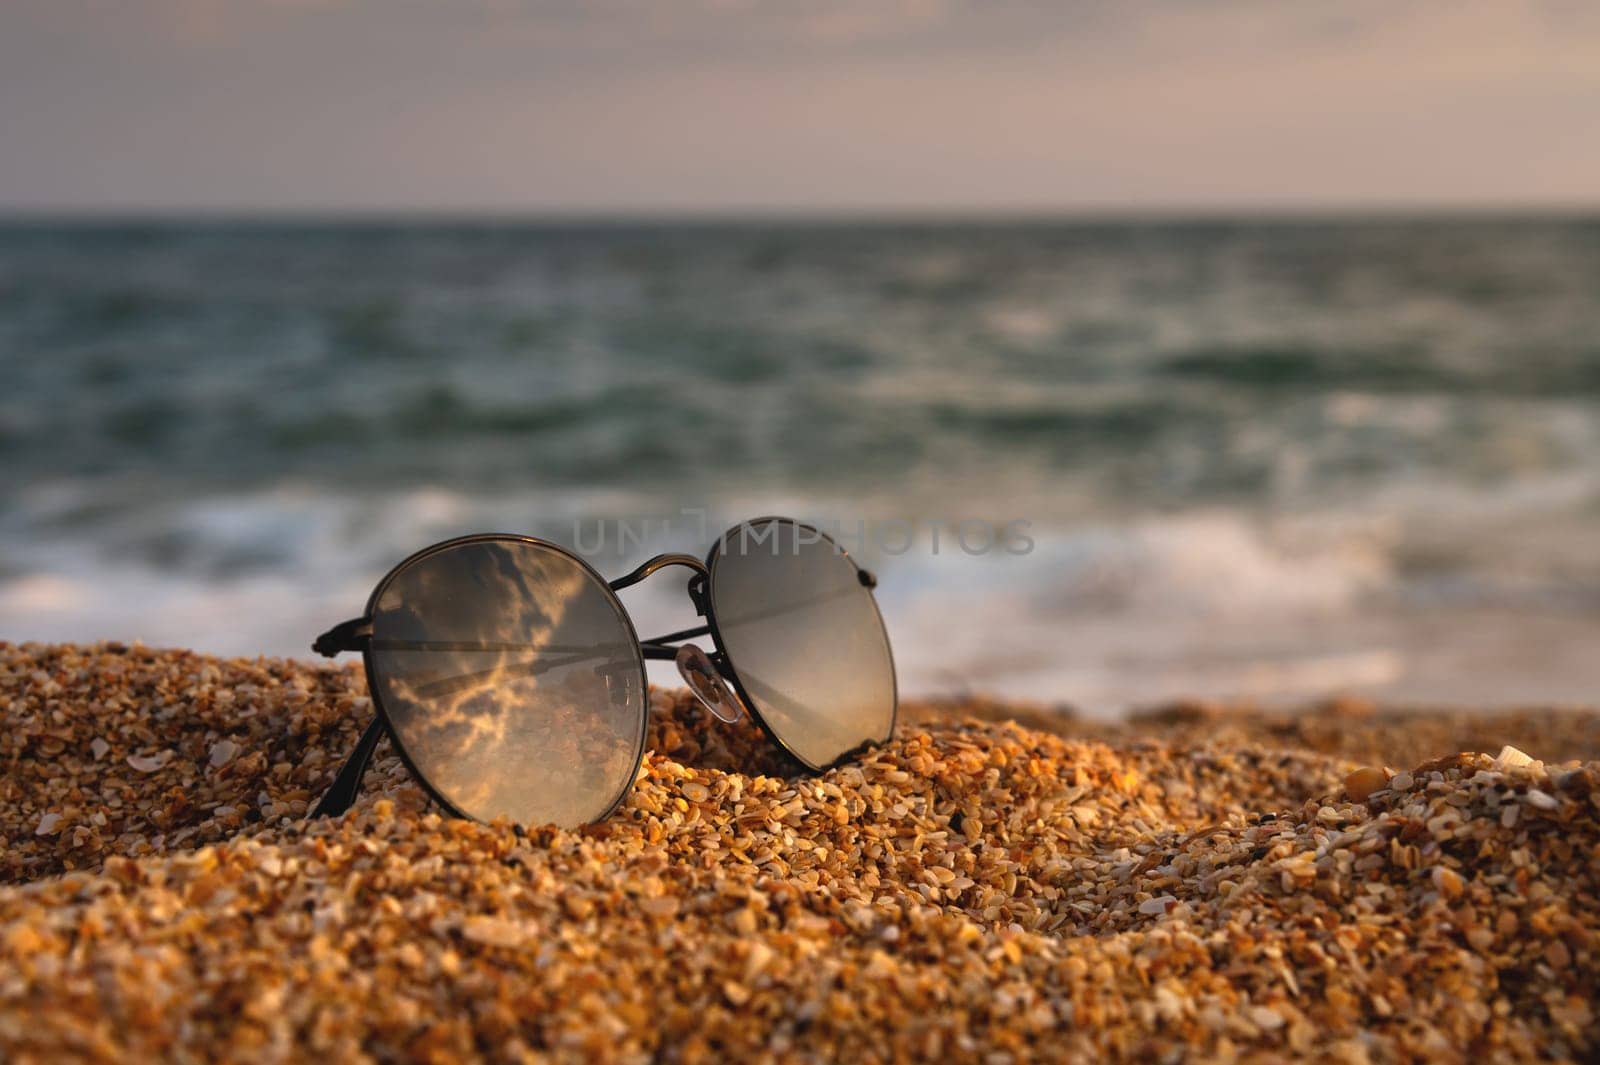 Side view of sunglasses on the beach near the turquoise sea with sand. Summer, beach holiday, stylish sunglasses, no people.